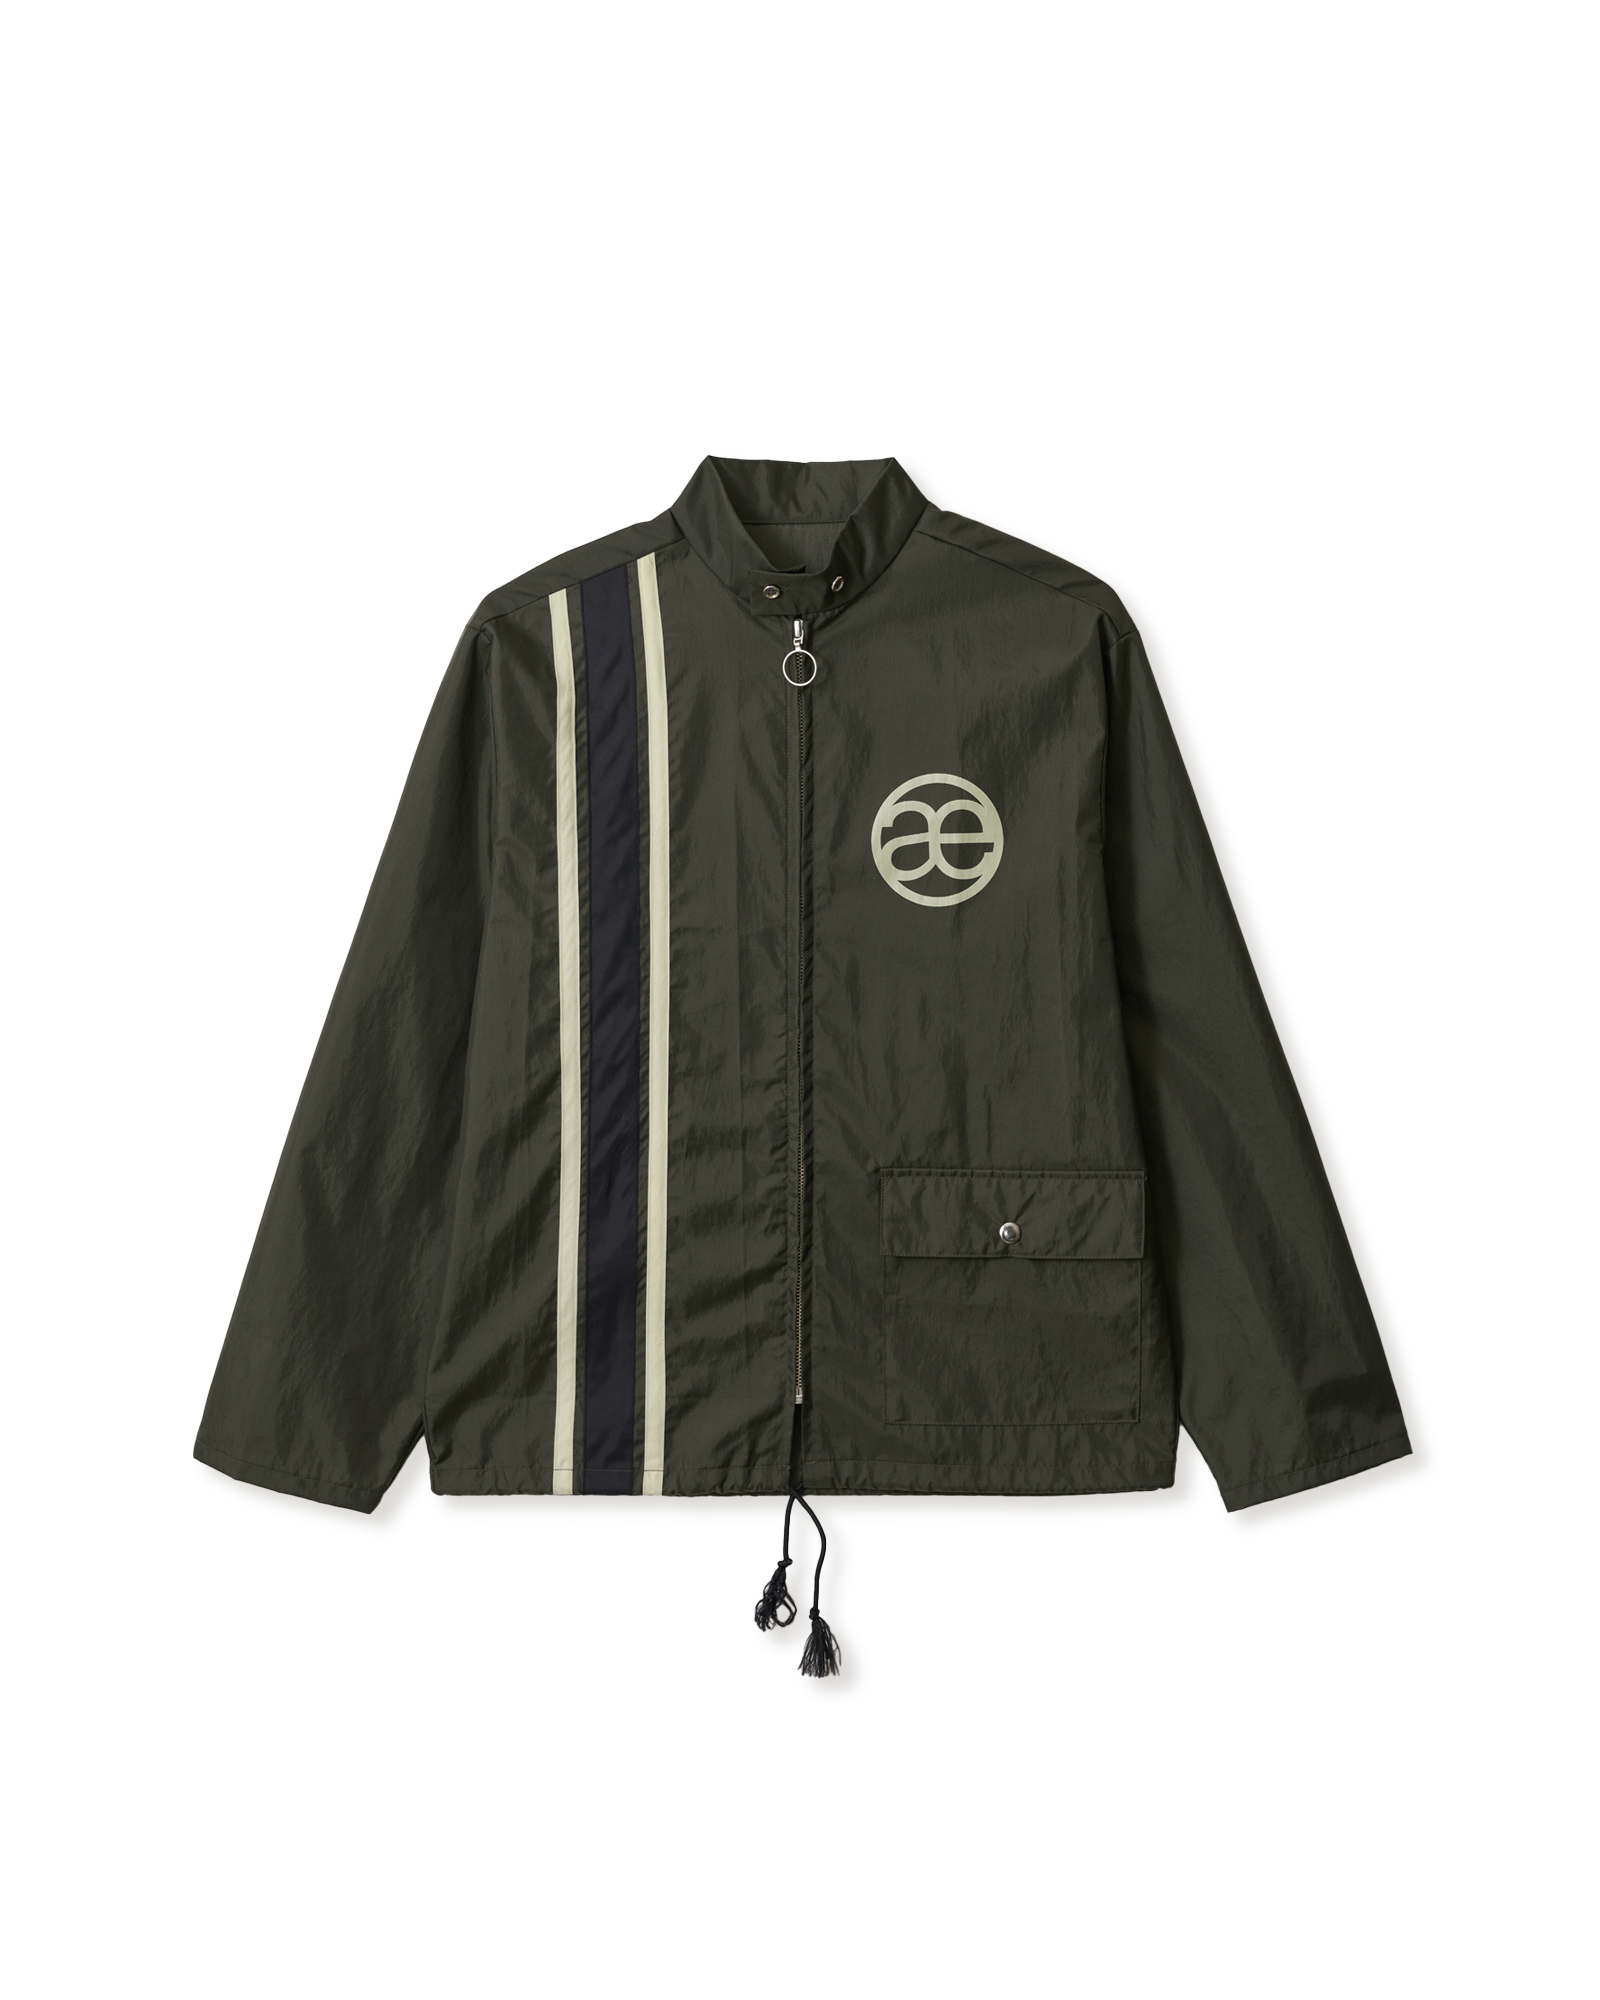 DRIVING TRAINEE JACKET [OLIVE]